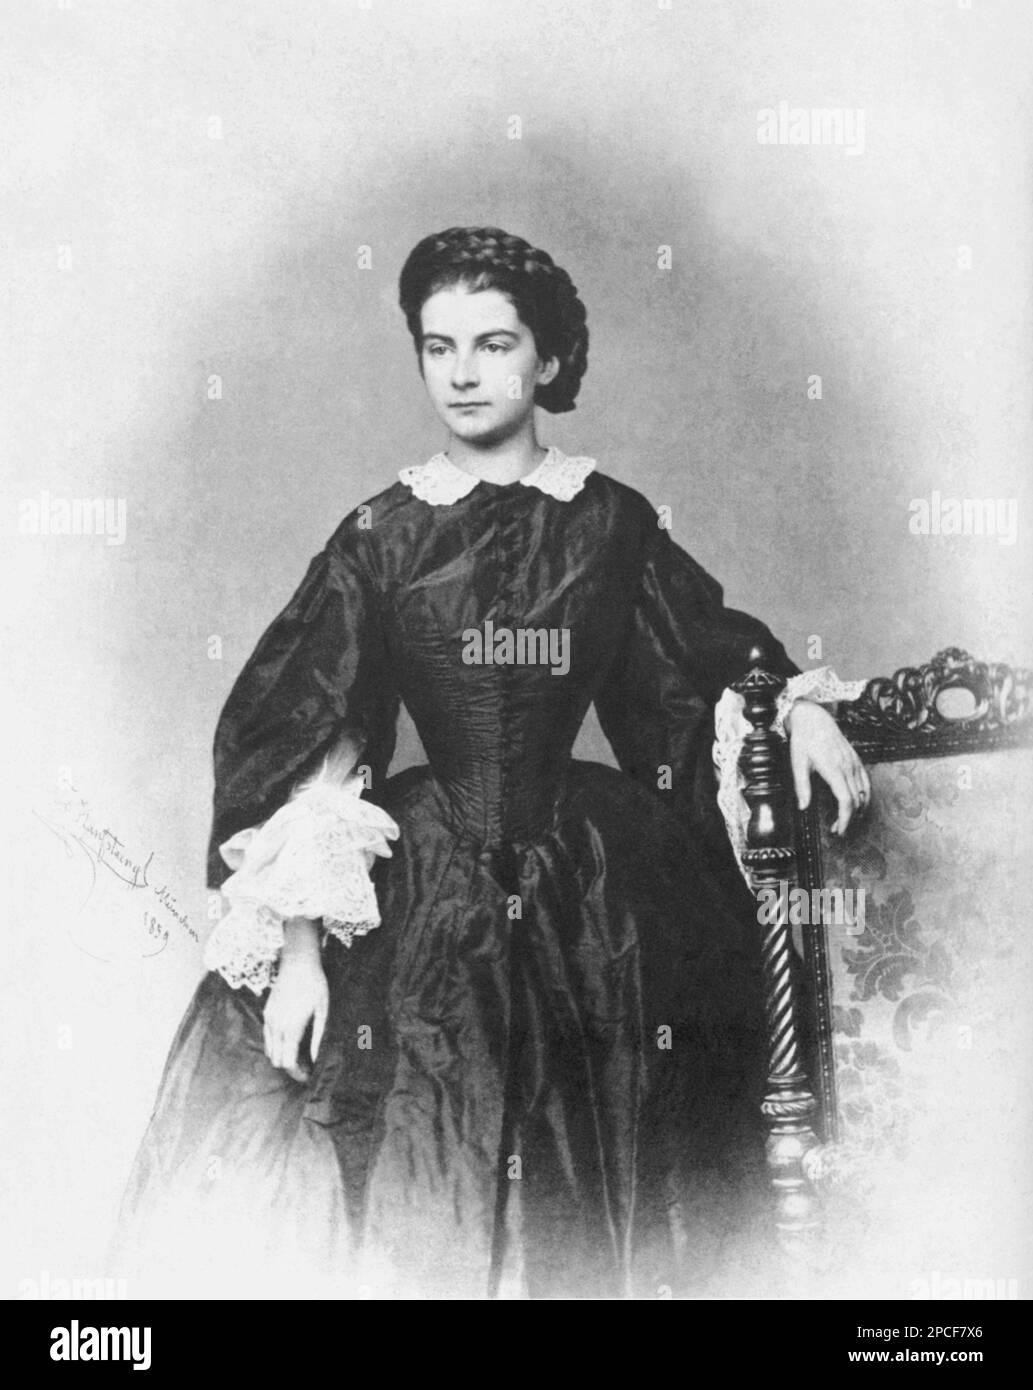 1859 , BAVIERA , GERMANY : The future Queen MARIA SOFIA delle DUE SICILIE ( Maria Sophia Duchess of Baviera , Possenhofen 1841 - Munchen 1925 ) just few time before her marriage . Photo by Franz Hanfstaengl (1804-1877), Munich . Daughter of Duke Maximillian Josef and Ludovica Principess of Baviera. ). Married in 1859 with to FRANCESCO II ( “Franceschiello” , Napoli  1836 -  Arco  1894 ) the King RE DELLE DUE SICILIE , son of FERDINANDO II the  King RE DI NAPOLI e DELLE DUE SICILIE ( Palermo 1810 - Caserta 1859 ) and Maria Cristina di Savoia ( Cagliari 1812 - Caserta 1836), daughter of  Vittori Stock Photo